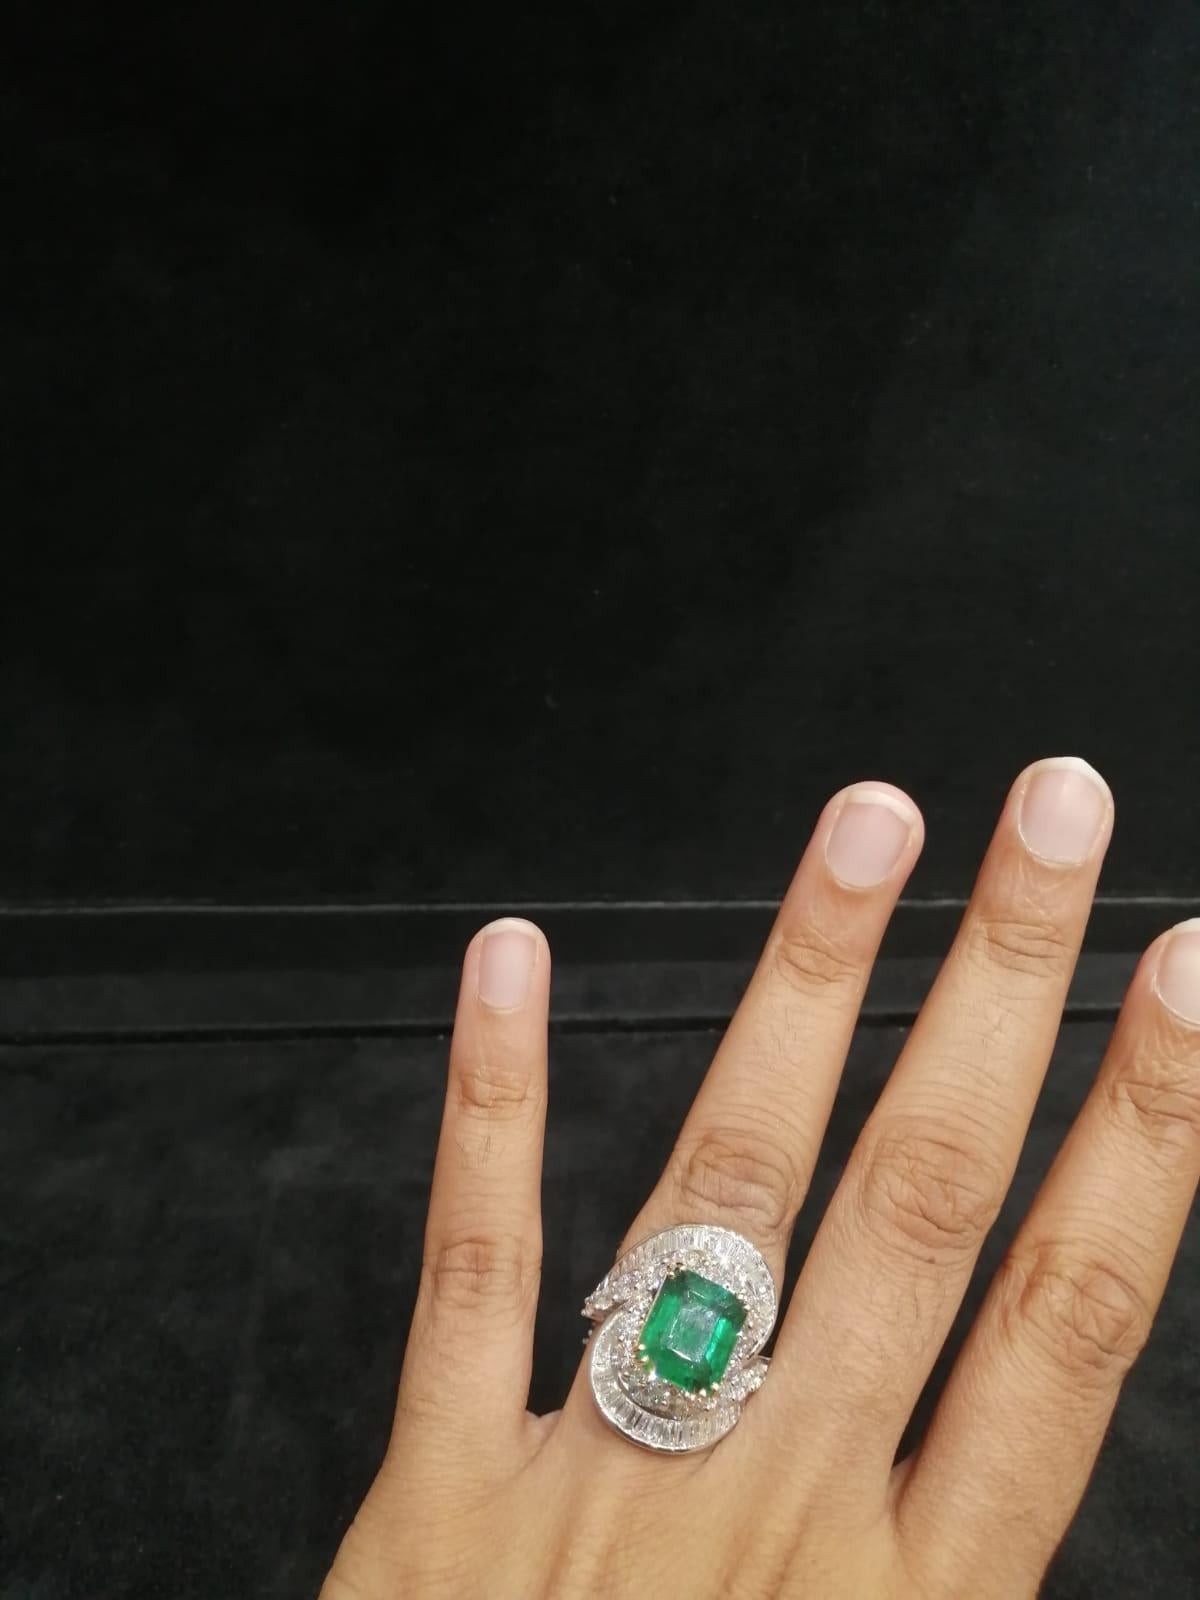 5.39 Carat Emerald and Diamond Ring in 18K White Gold For Sale 3